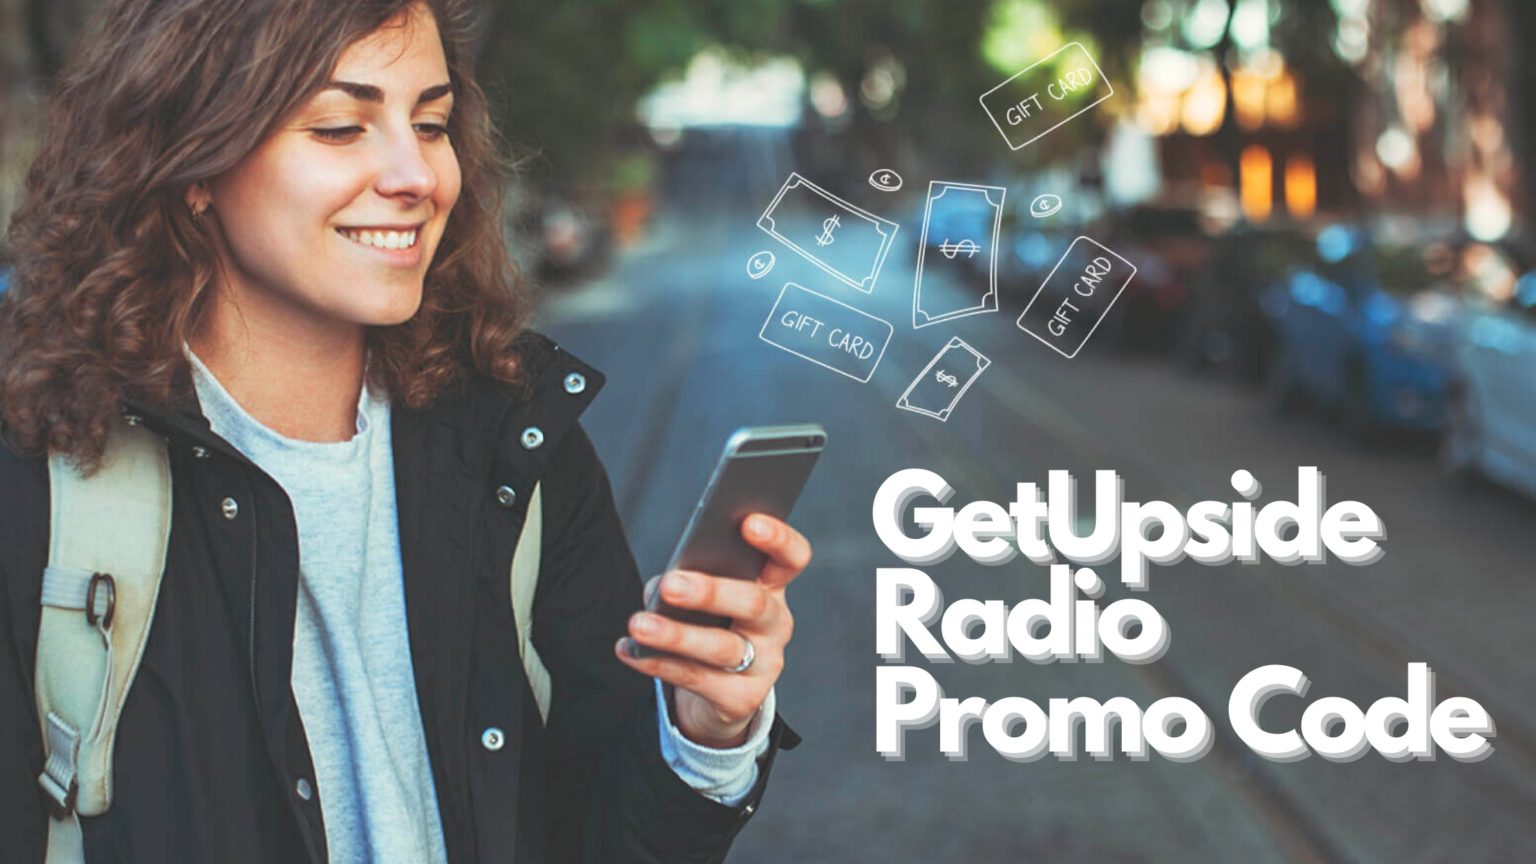 Upside promo code radio Latest and greatest codes for you